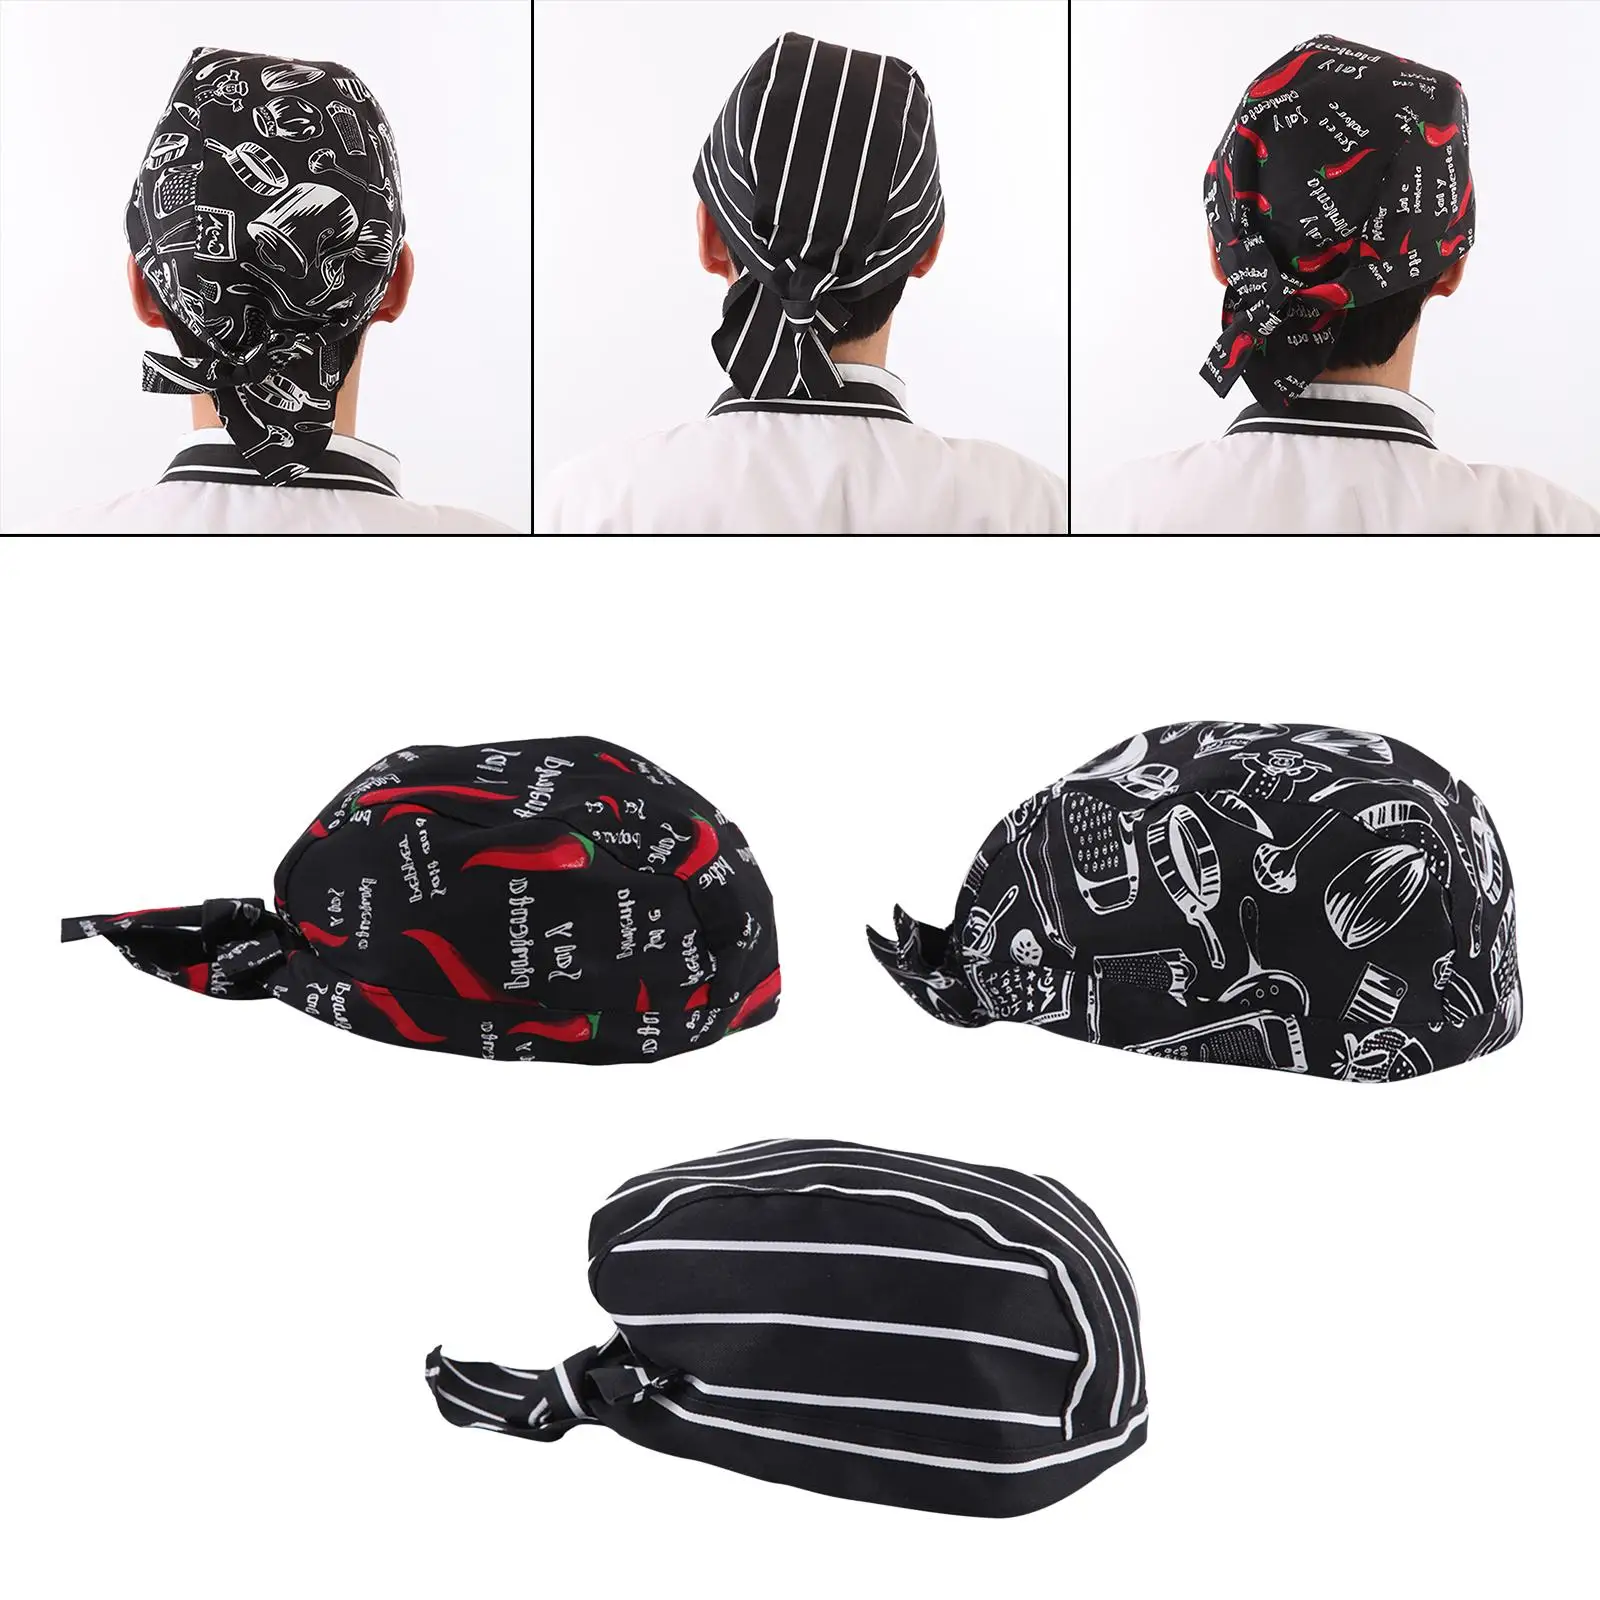 3Pcs Chef Hat Fashion Waiter Cap Kitchen Cooking Cap Working Caps Bandana Head Scarf for Worker Catering Cafe Hotel Restaurant